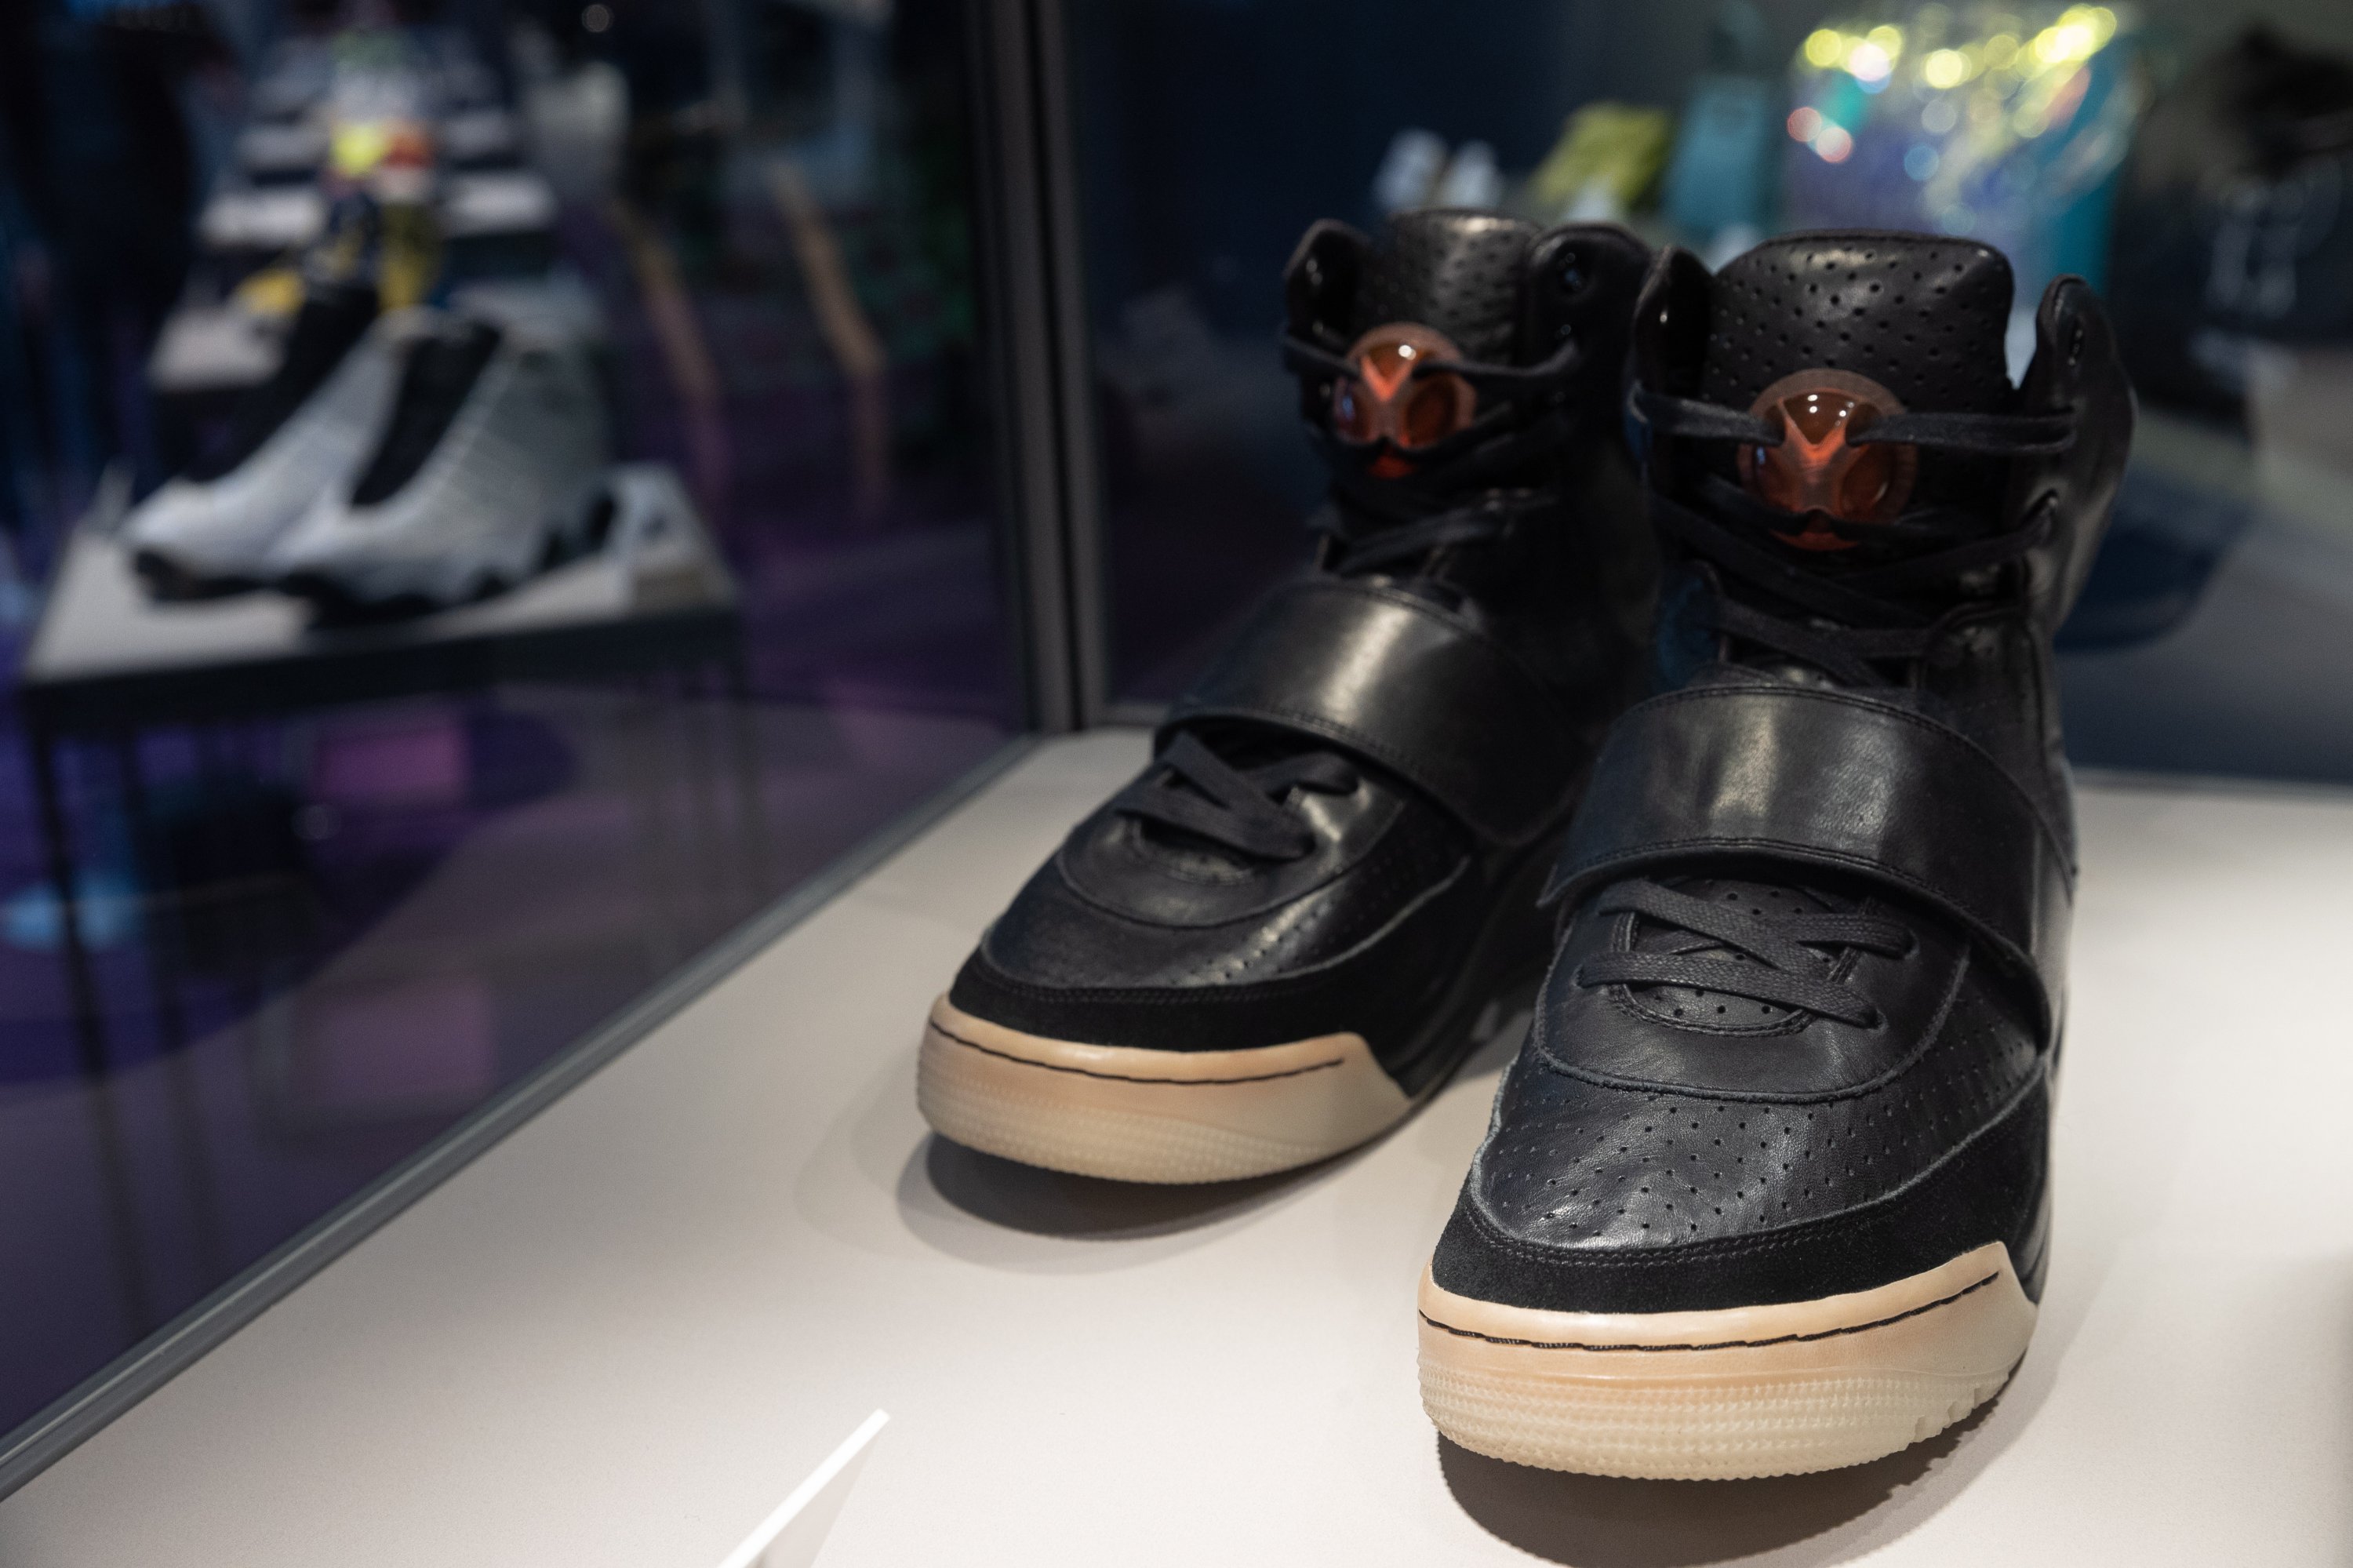 Kanye West's Nike sneakers sold for record $1.8 mn at Sotheby's | Daily Sabah